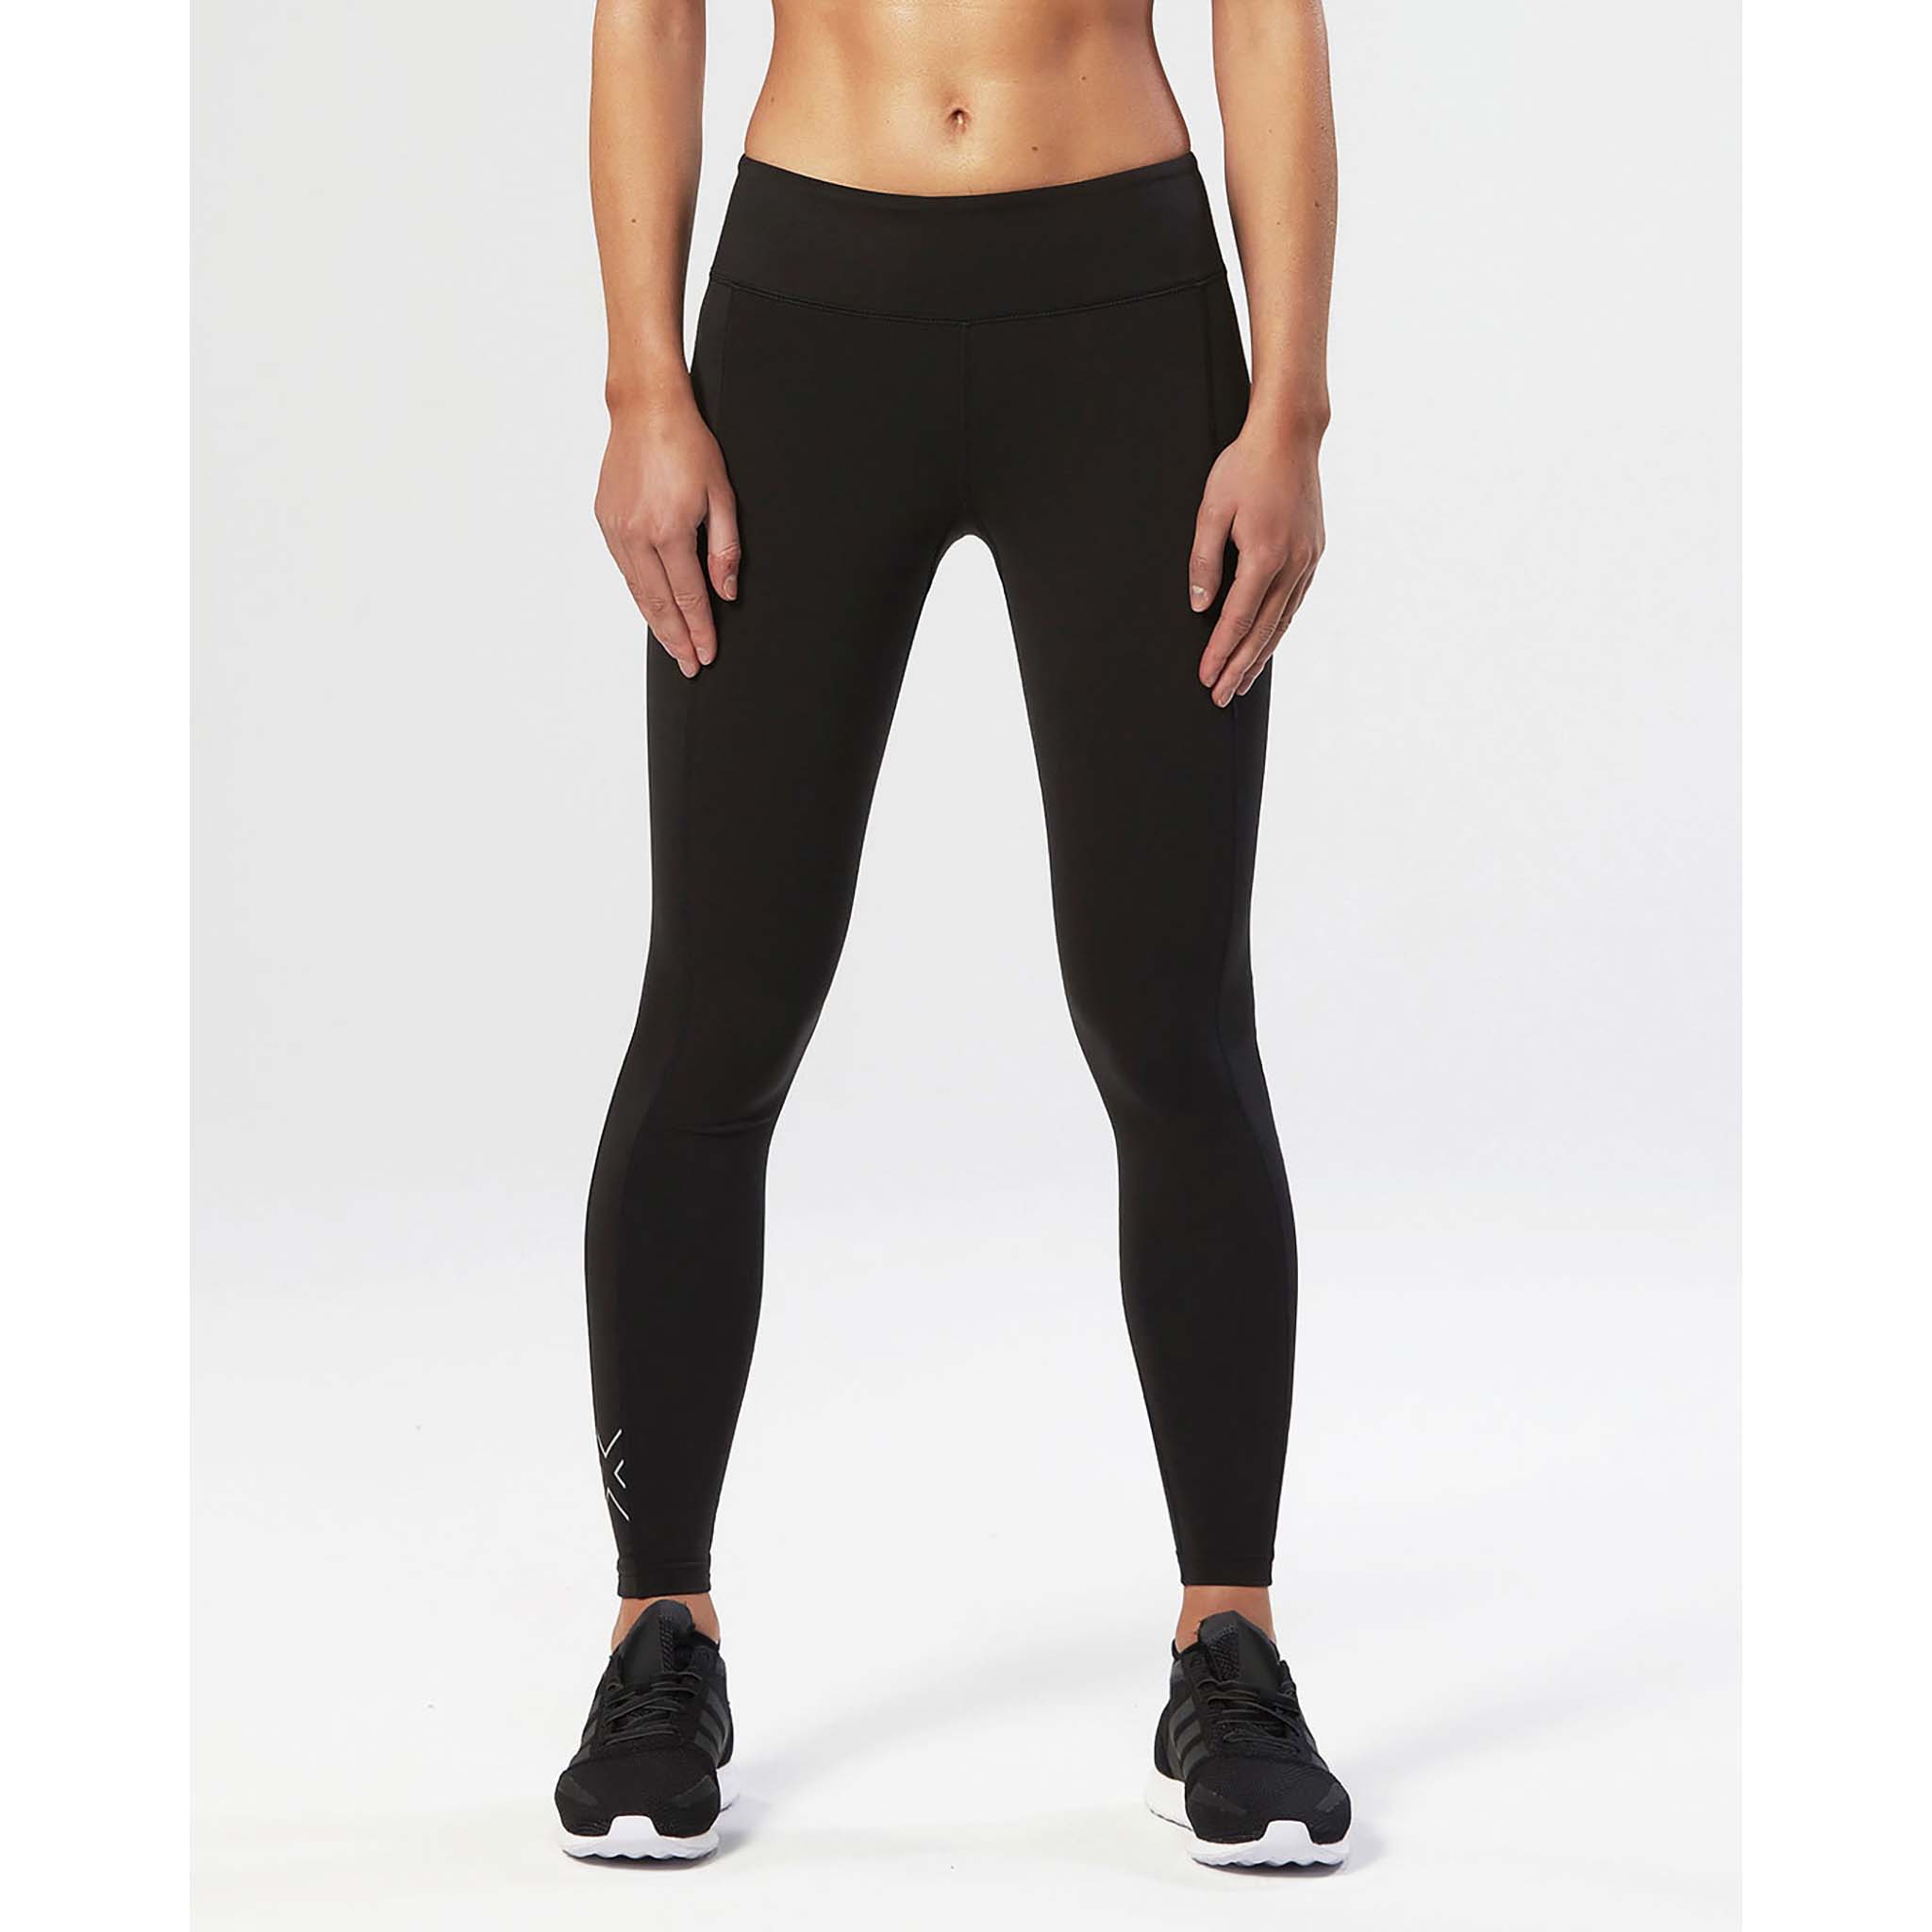 2XU mid-rise compression tights for women - Soccer Sport Fitness